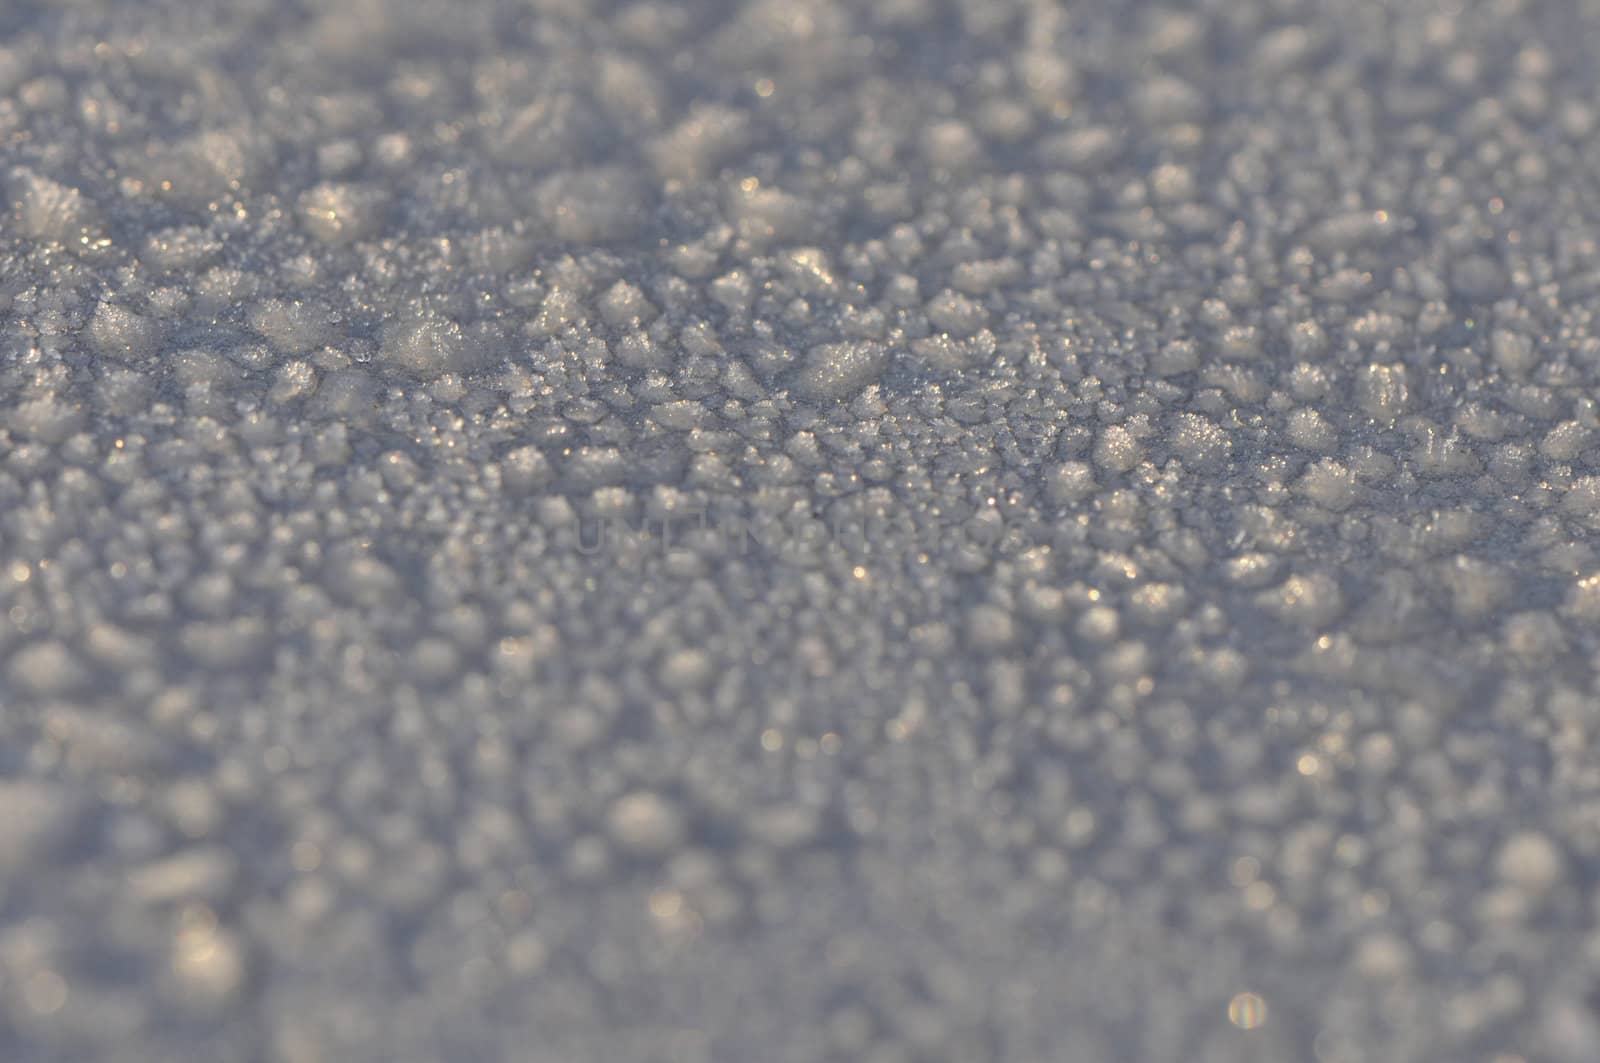 Abstract view of frost on a surface by shkyo30